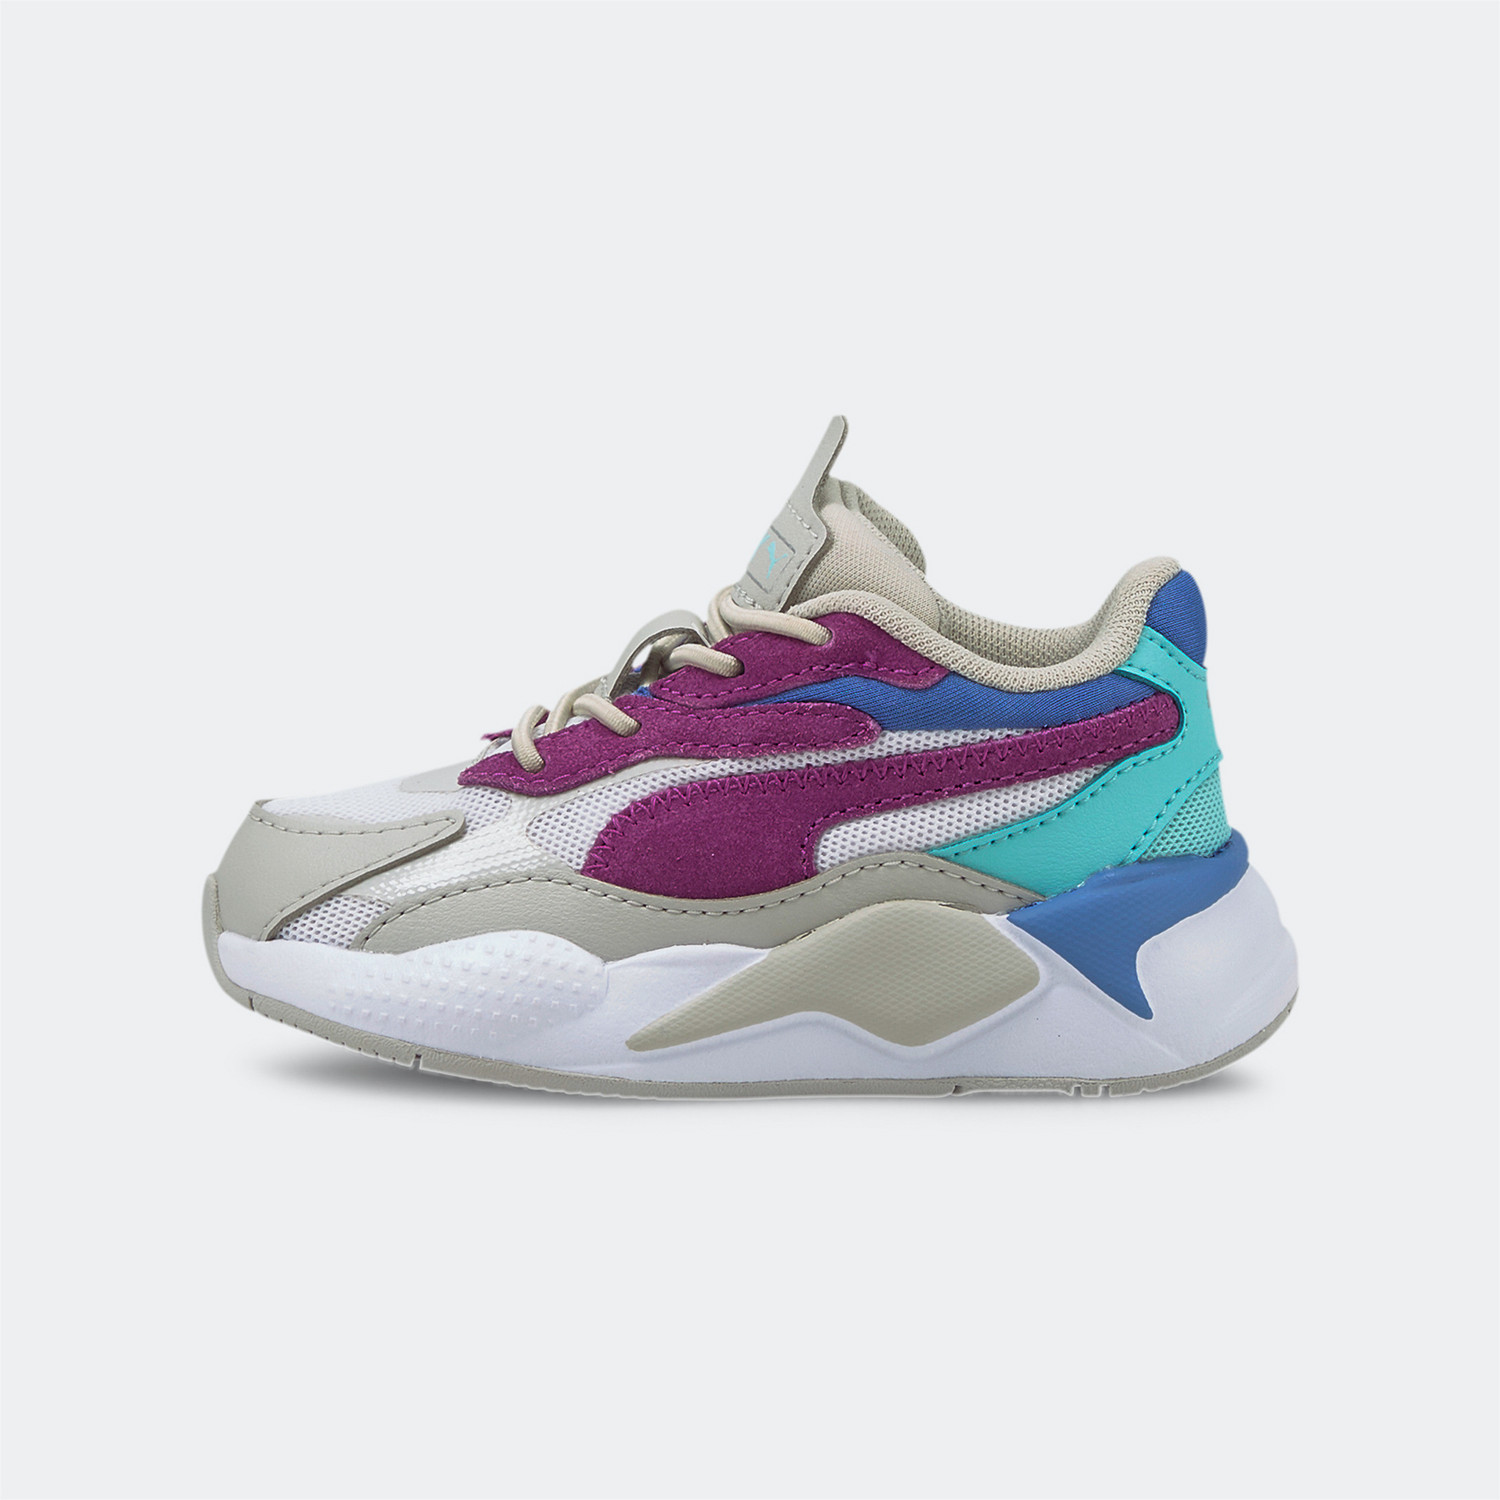 Puma Rs-X³ Neon Flame Βρεφικά Παπούτσια (9000072492_51282)